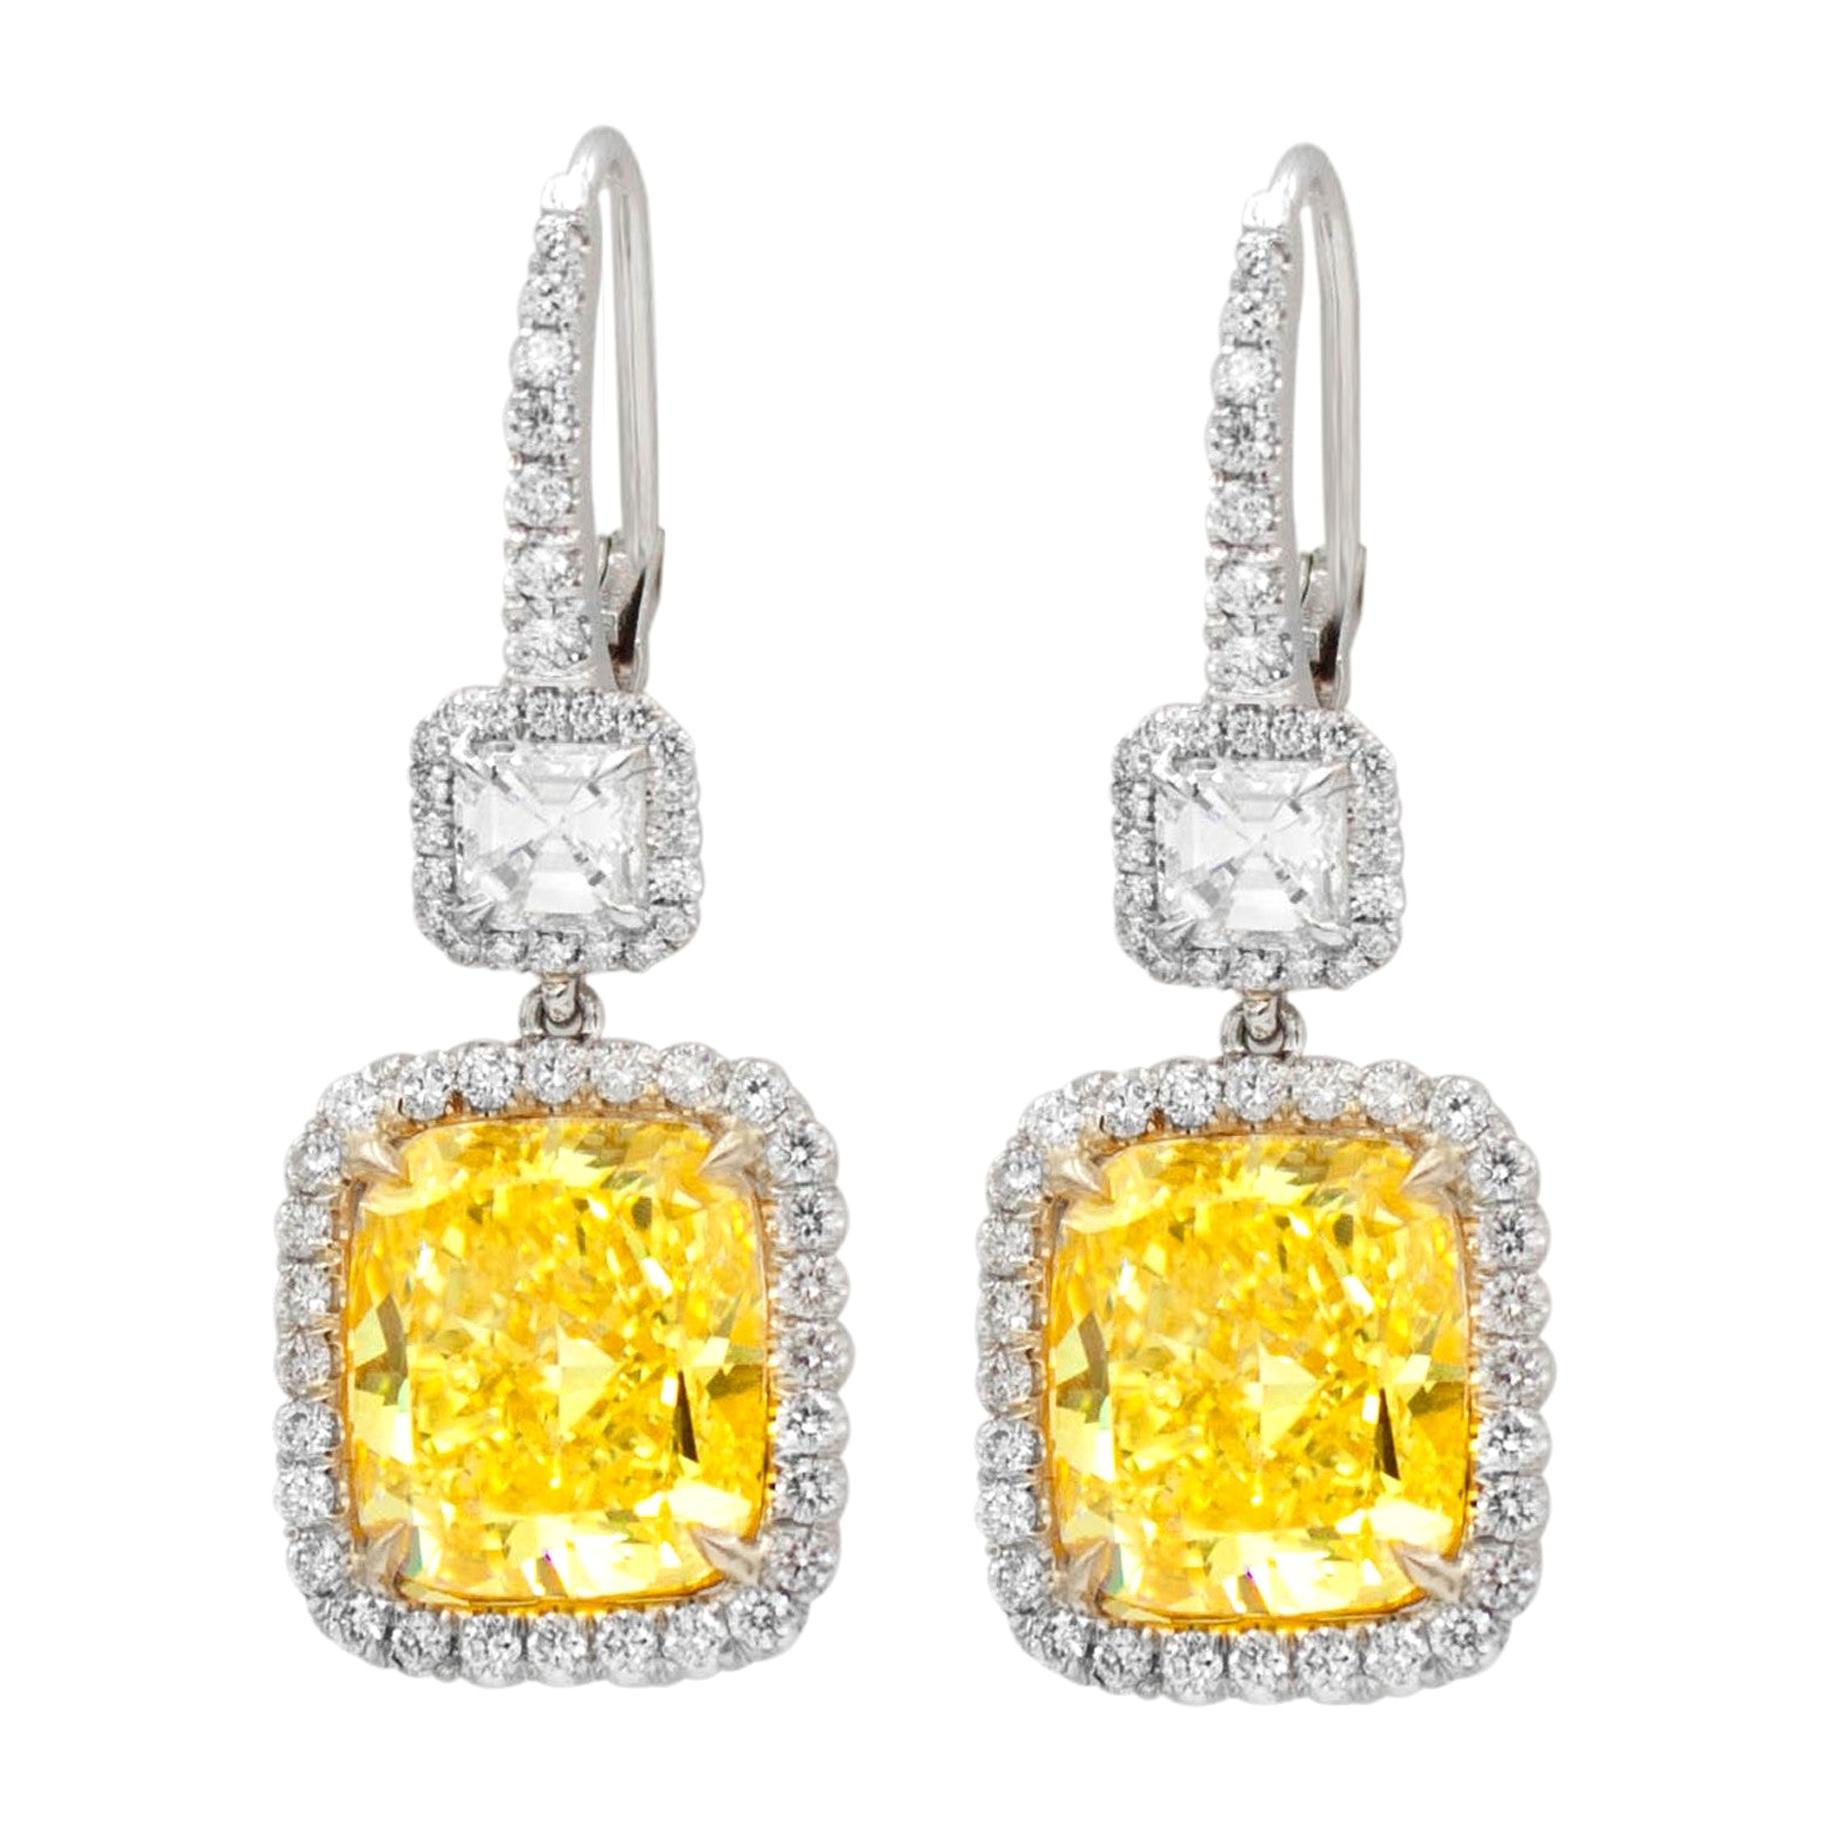 Platinum and 18kt Yellow Gold Fancy Yellow Diamond Earrings